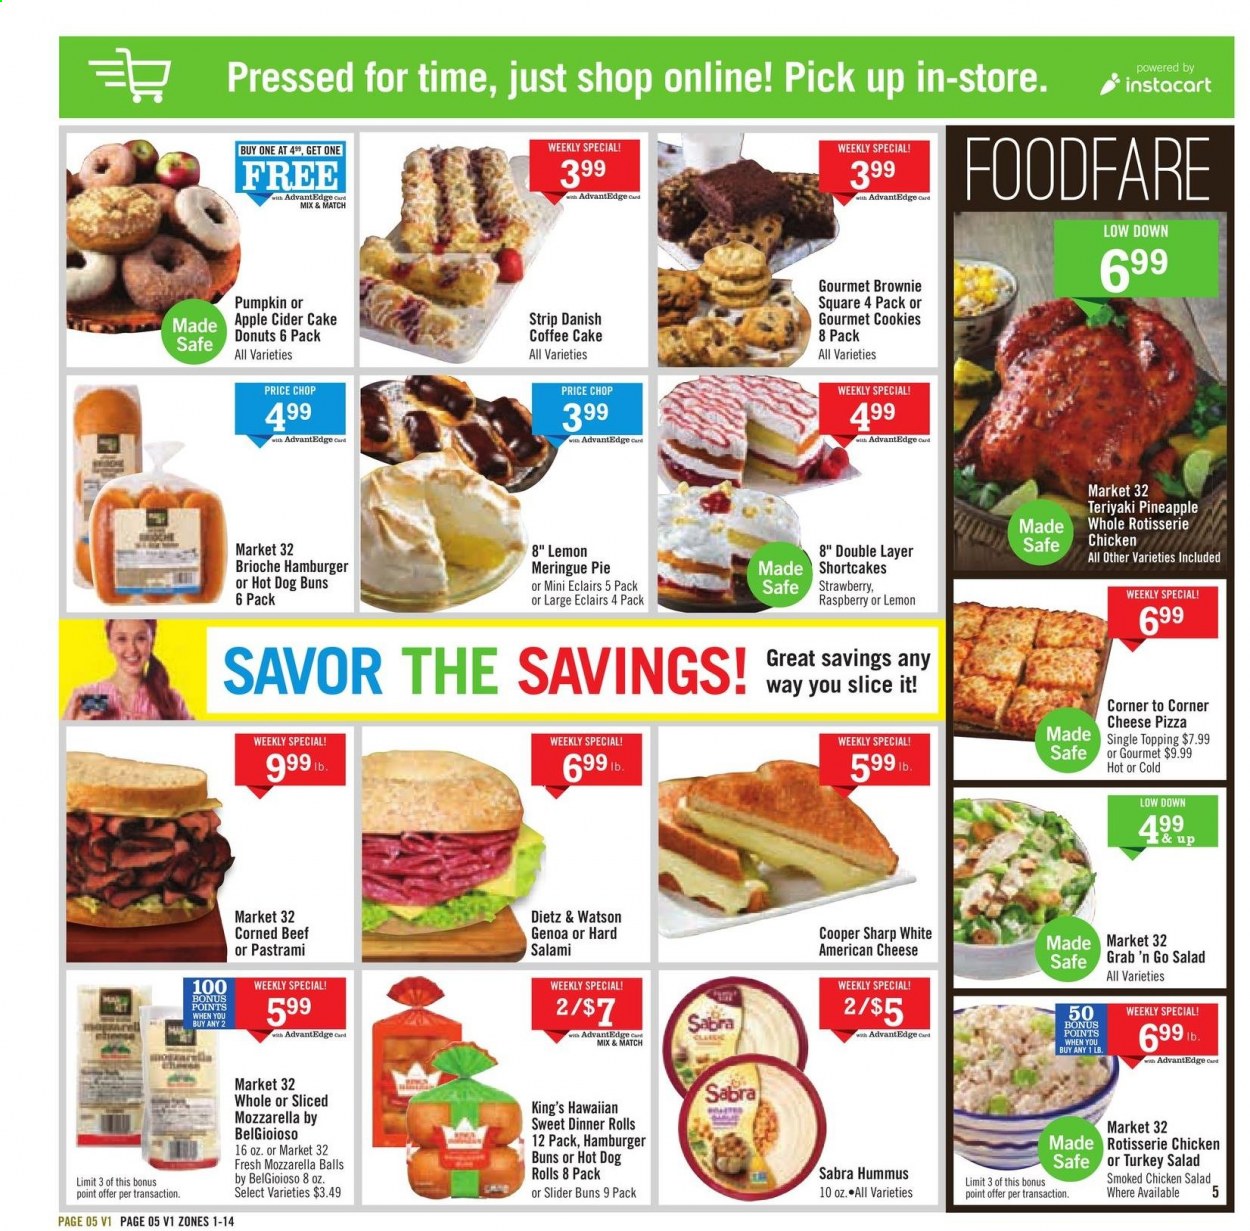 thumbnail - Price Chopper Flyer - 08/22/2021 - 08/28/2021 - Sales products - hot dog rolls, cake, pie, dinner rolls, buns, burger buns, brioche, brownies, donut, coffee cake, pumpkin, salad, pineapple, pizza, chicken roast, salami, pastrami, Dietz & Watson, hummus, chicken salad, corned beef, american cheese, cookies, topping, apple cider, cider, beef meat. Page 5.